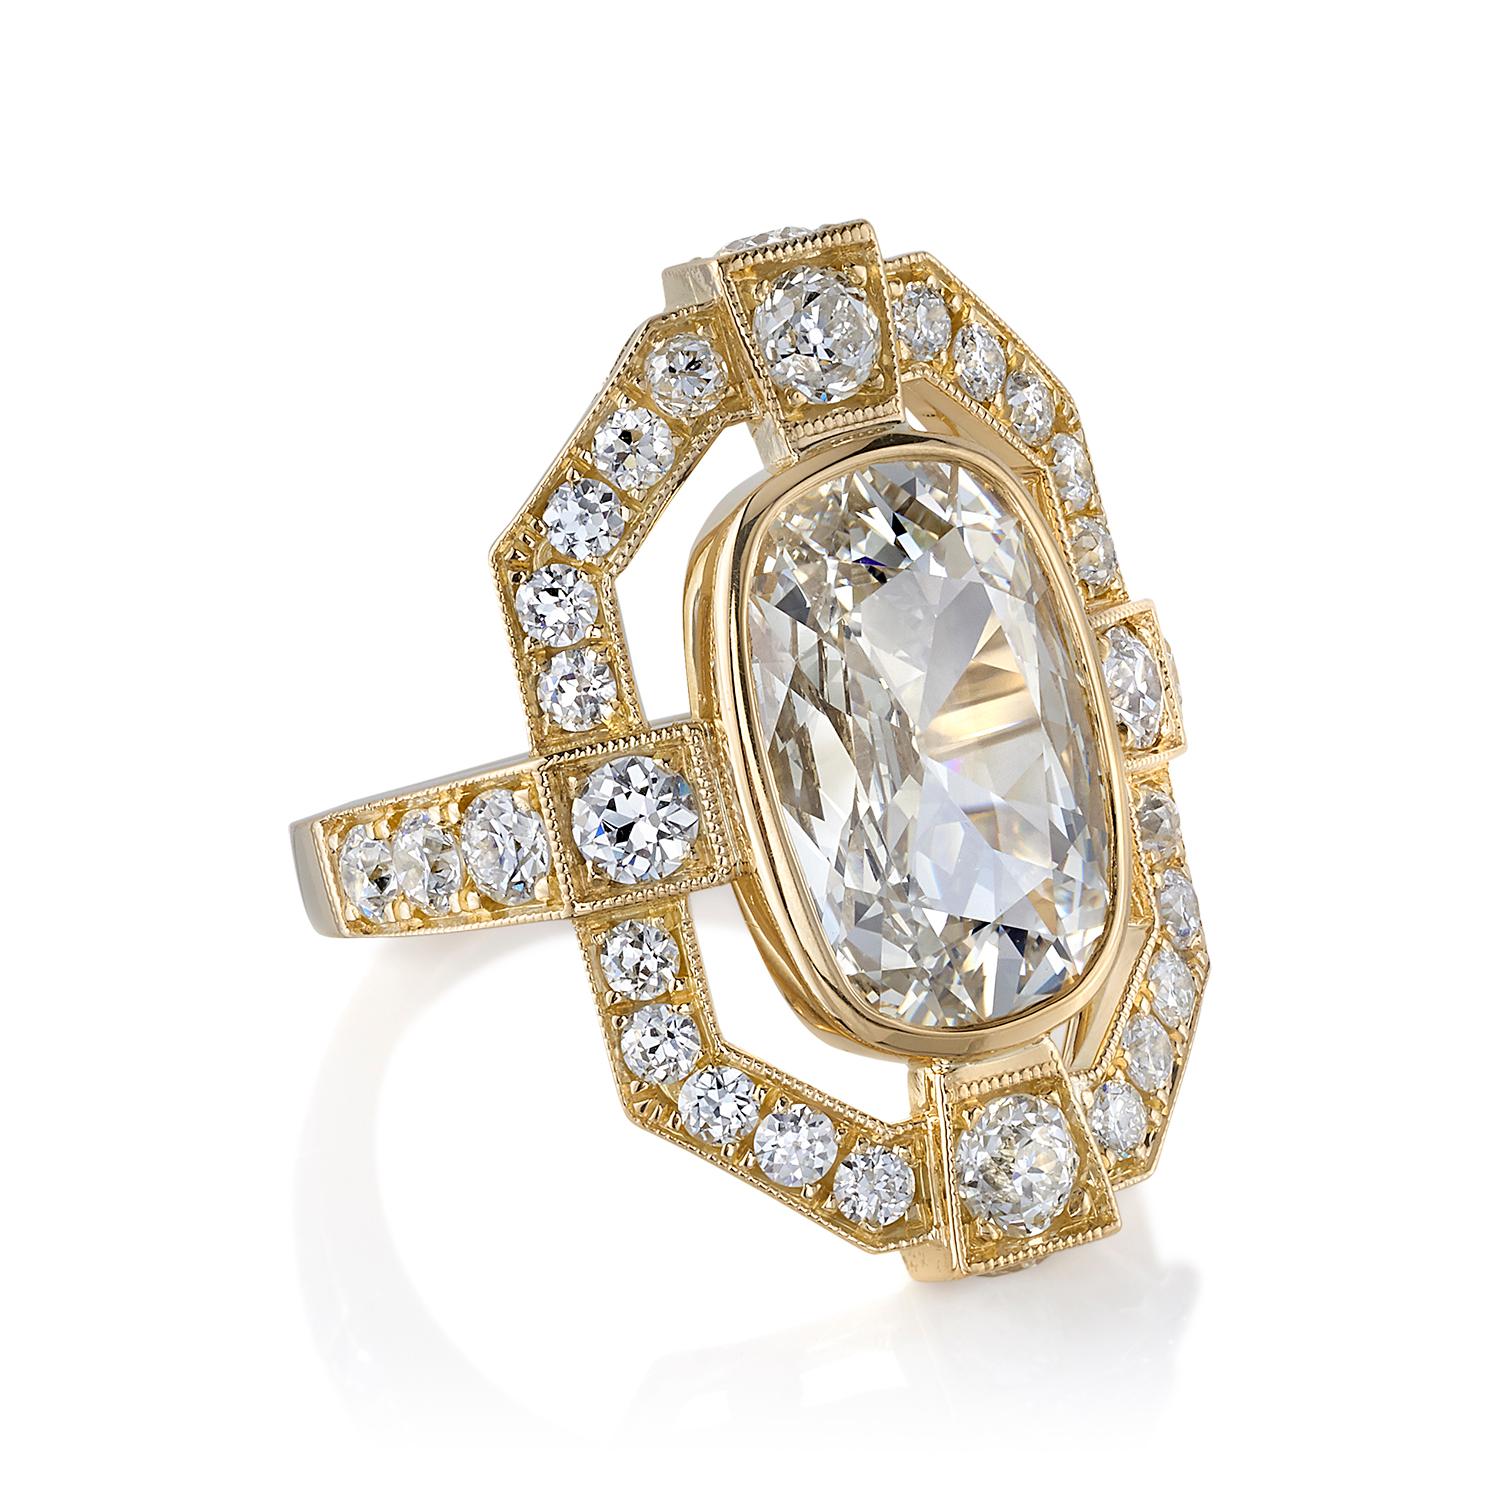 4.02ct M/VS1 GIA certified Cushion cut diamond with 1.79ctw old European cut accent diamonds set in a handcrafted 18K yellow gold mounting.

Ring is currently size 6. Please contact us about potential re-sizing.

Our jewelry is made locally in Los